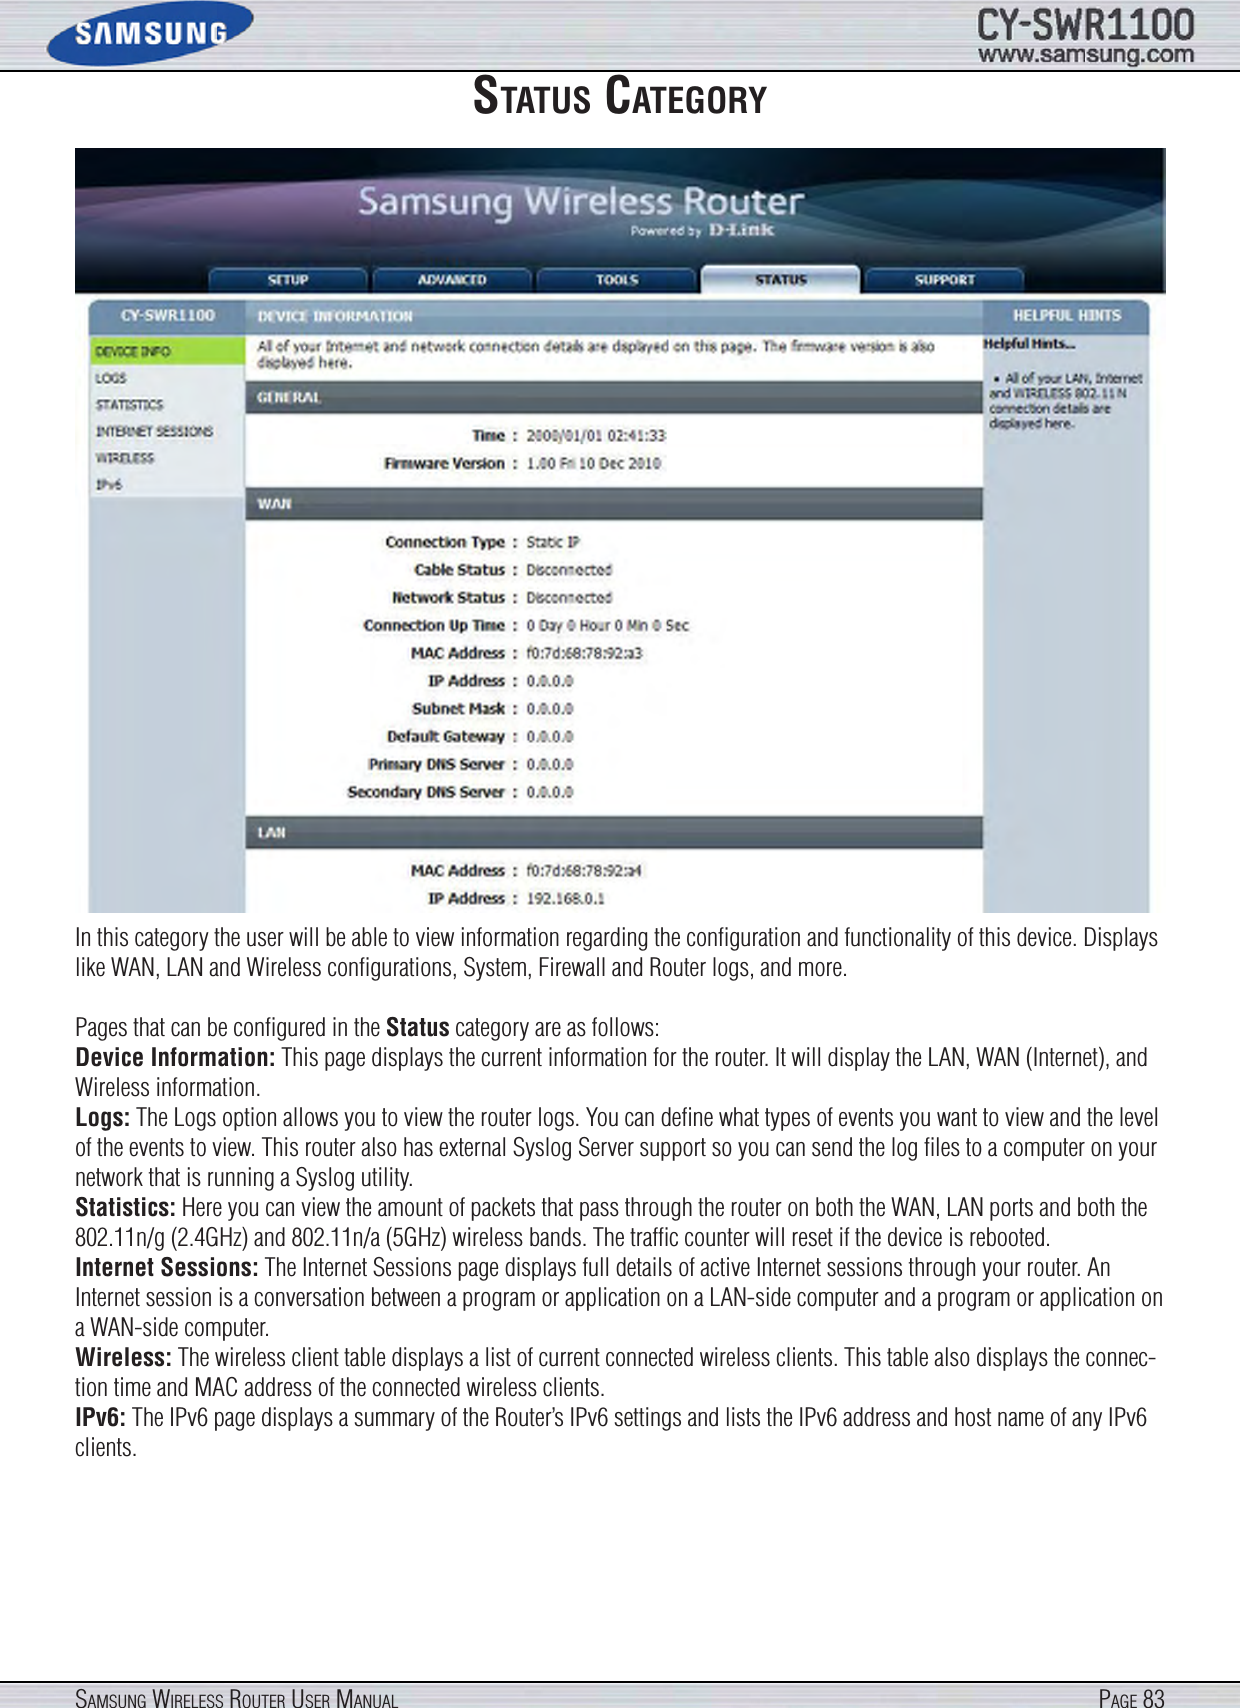 Page 83SamSung WireleSS router uSer manualStatuS categoryIn this category the user will be able to view information regarding the conﬁguration and functionality of this device. Displays like WAN, LAN and Wireless conﬁgurations, System, Firewall and Router logs, and more.Pages that can be conﬁgured in the Status category are as follows:Device Information: This page displays the current information for the router. It will display the LAN, WAN (Internet), and Wireless information. Logs: The Logs option allows you to view the router logs. You can deﬁne what types of events you want to view and the level of the events to view. This router also has external Syslog Server support so you can send the log ﬁles to a computer on your network that is running a Syslog utility.Statistics: Here you can view the amount of packets that pass through the router on both the WAN, LAN ports and both the 802.11n/g (2.4GHz) and 802.11n/a (5GHz) wireless bands. The trafﬁc counter will reset if the device is rebooted.Internet Sessions: The Internet Sessions page displays full details of active Internet sessions through your router. An Internet session is a conversation between a program or application on a LAN-side computer and a program or application on a WAN-side computer.Wireless: The wireless client table displays a list of current connected wireless clients. This table also displays the connec-tion time and MAC address of the connected wireless clients.IPv6: The IPv6 page displays a summary of the Router’s IPv6 settings and lists the IPv6 address and host name of any IPv6 clients.